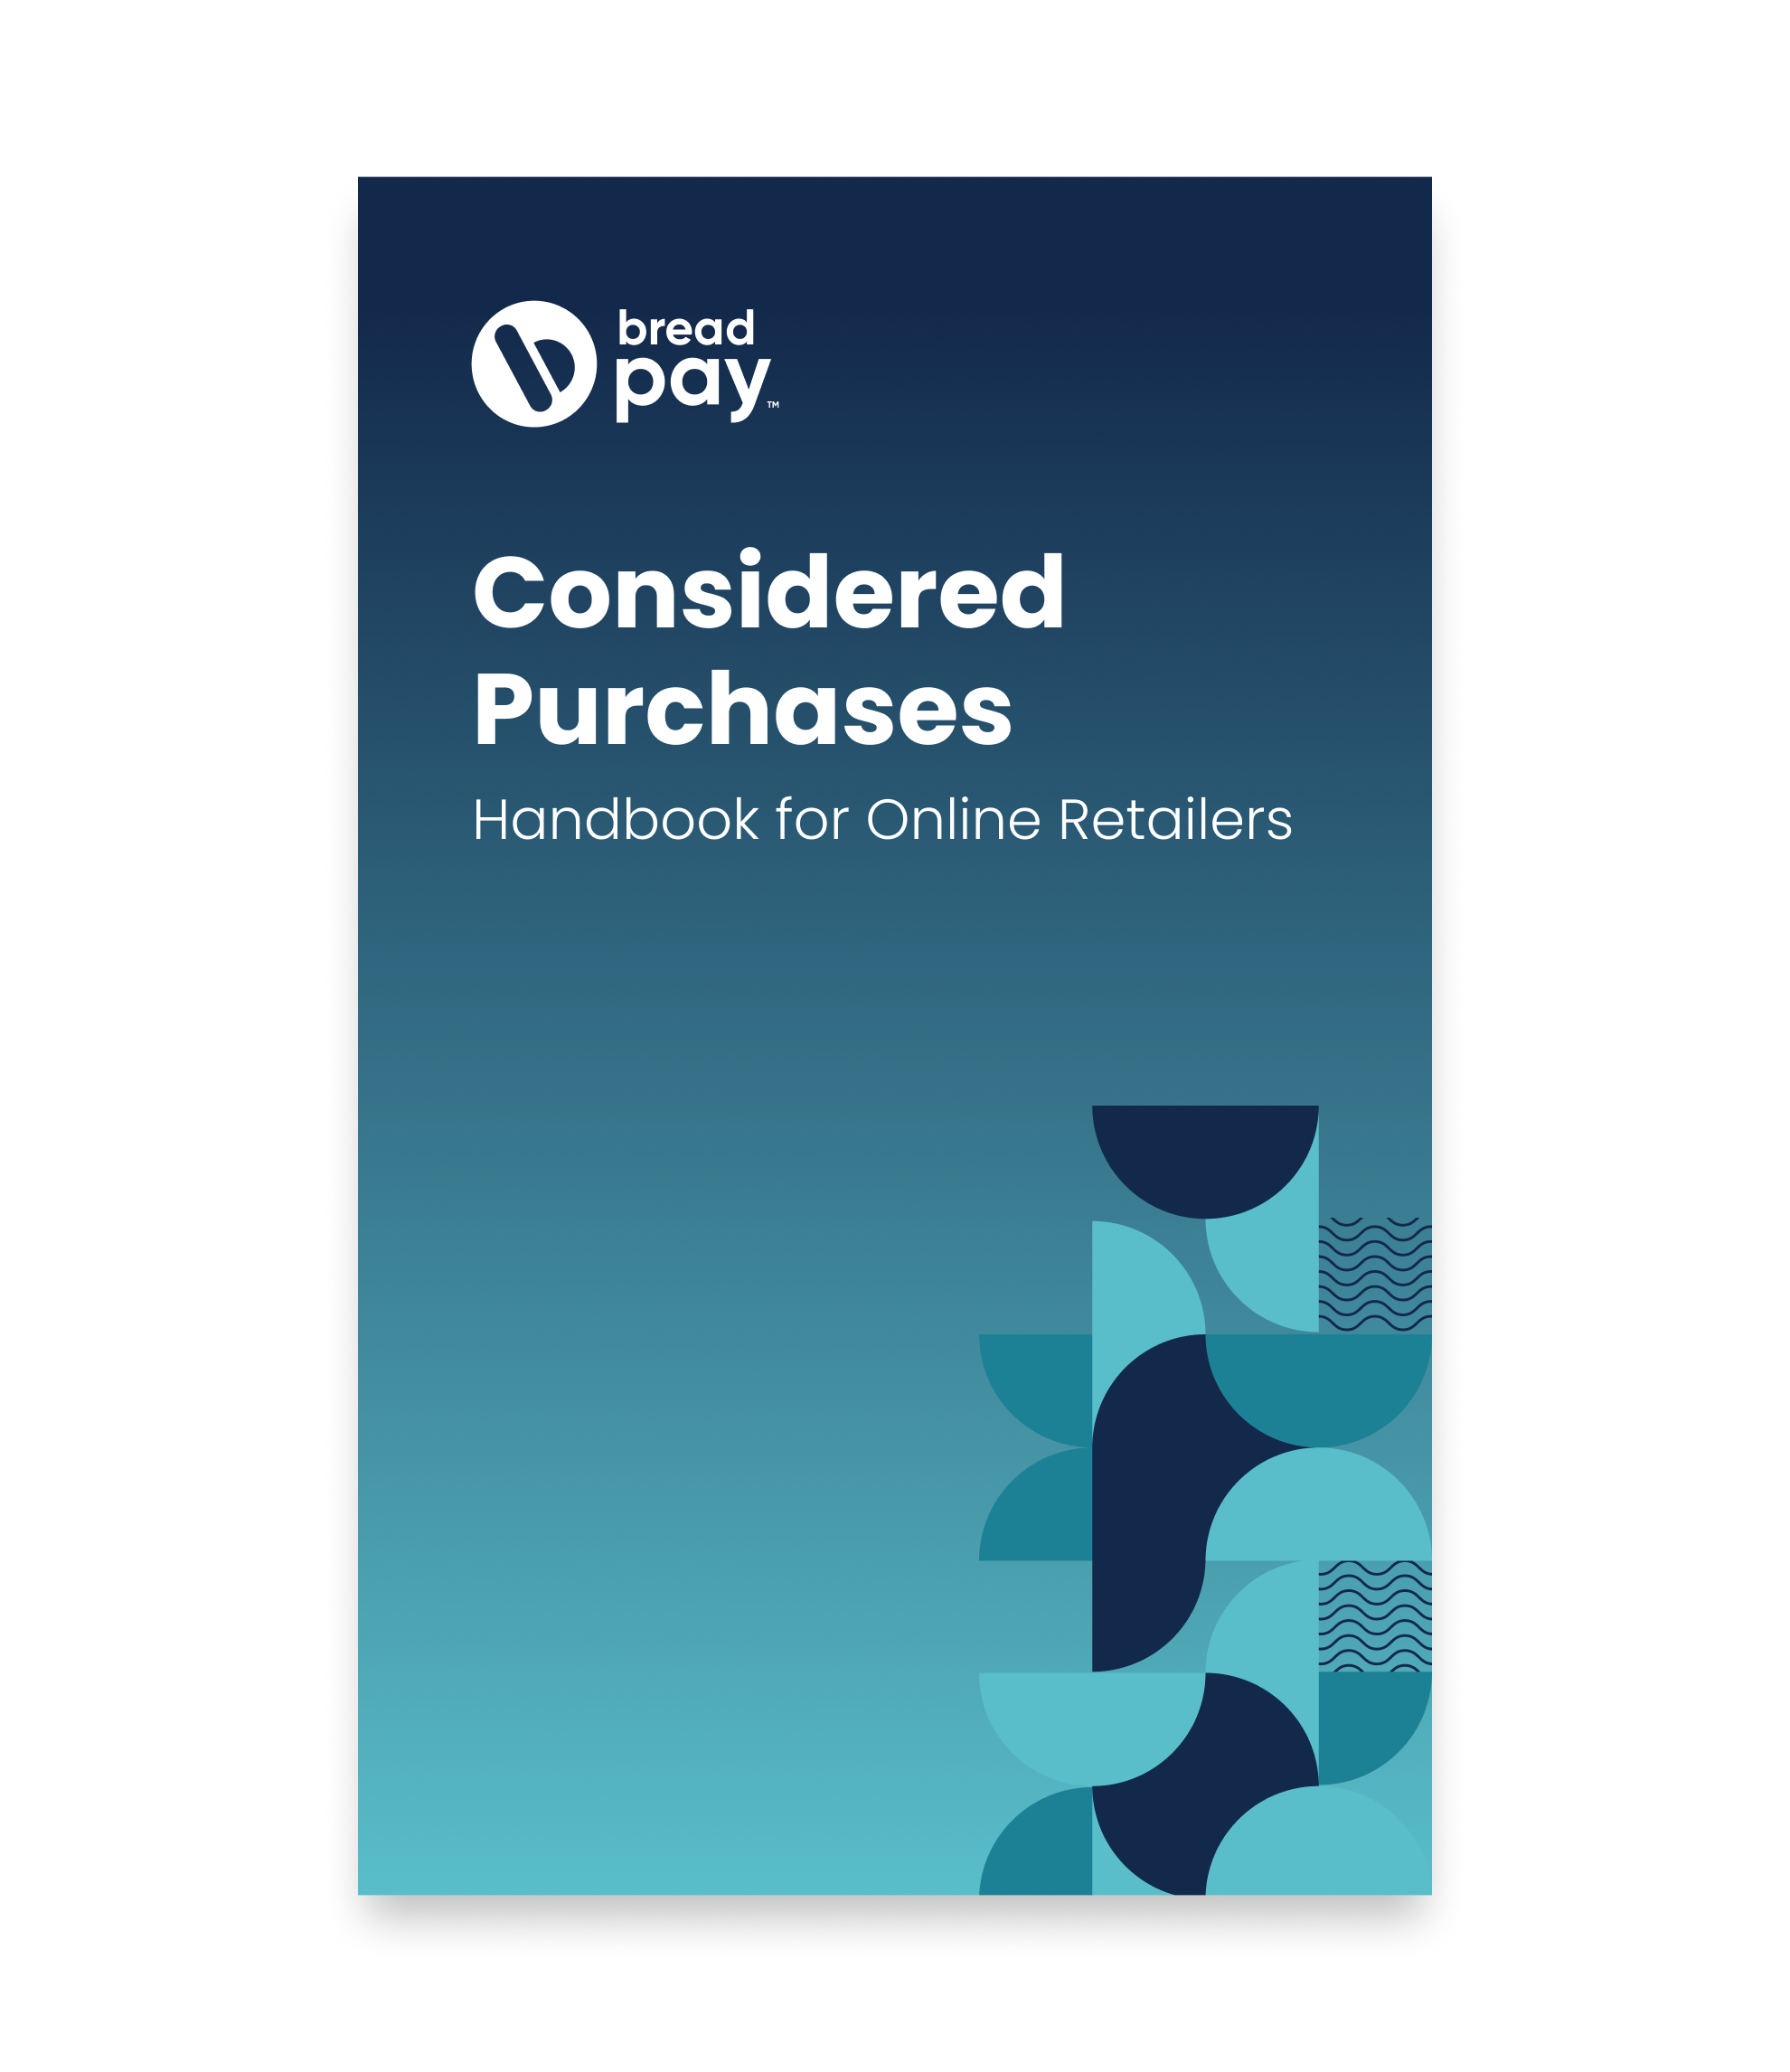 Considered Purchases Handbook for Online Retailers